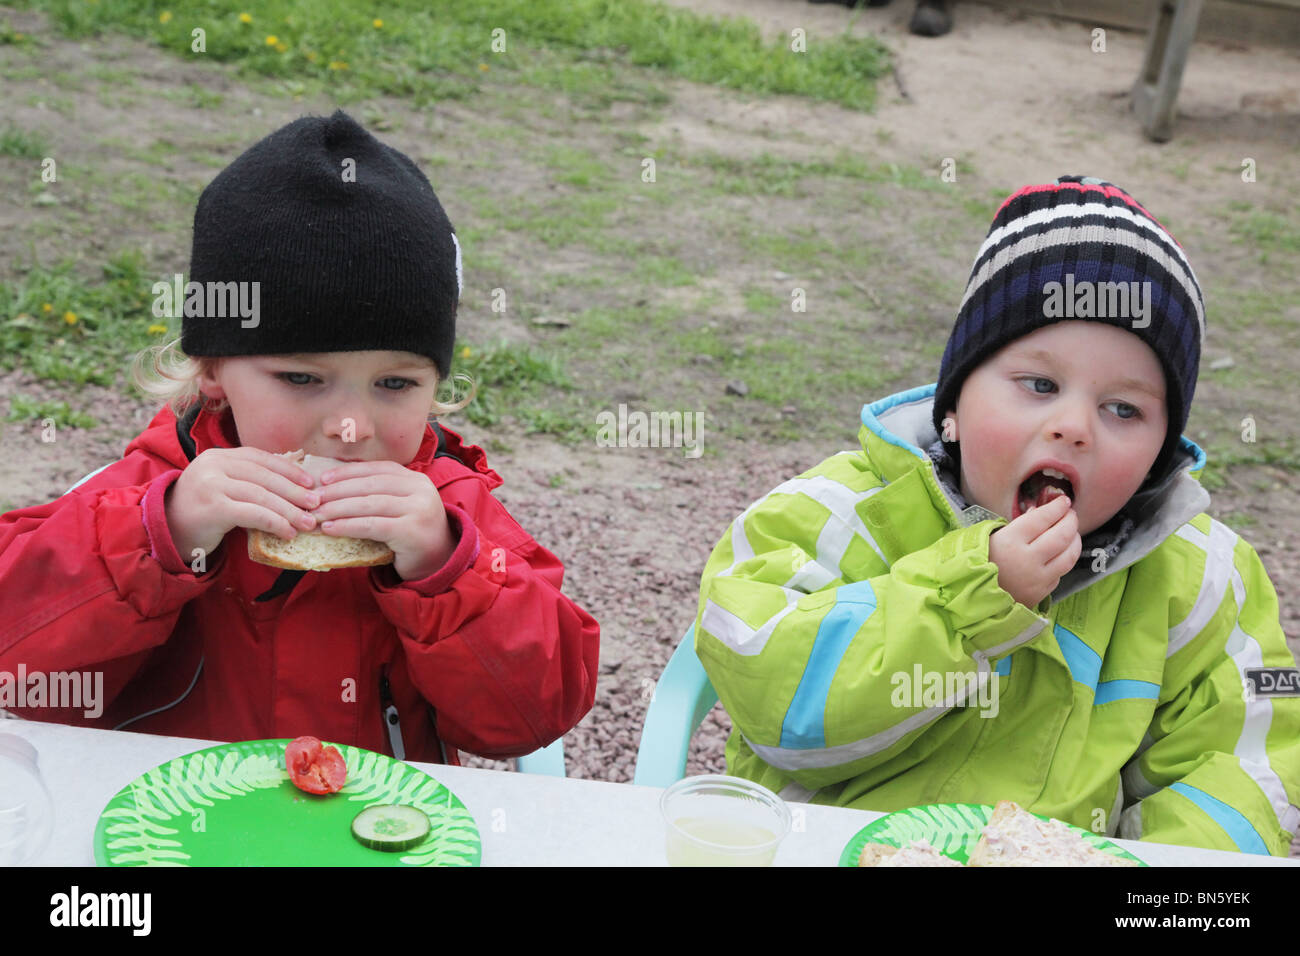 Toddlers boy girl siblings sitting at a party table waiting eating sandwiches MODEL RELEASED Stock Photo